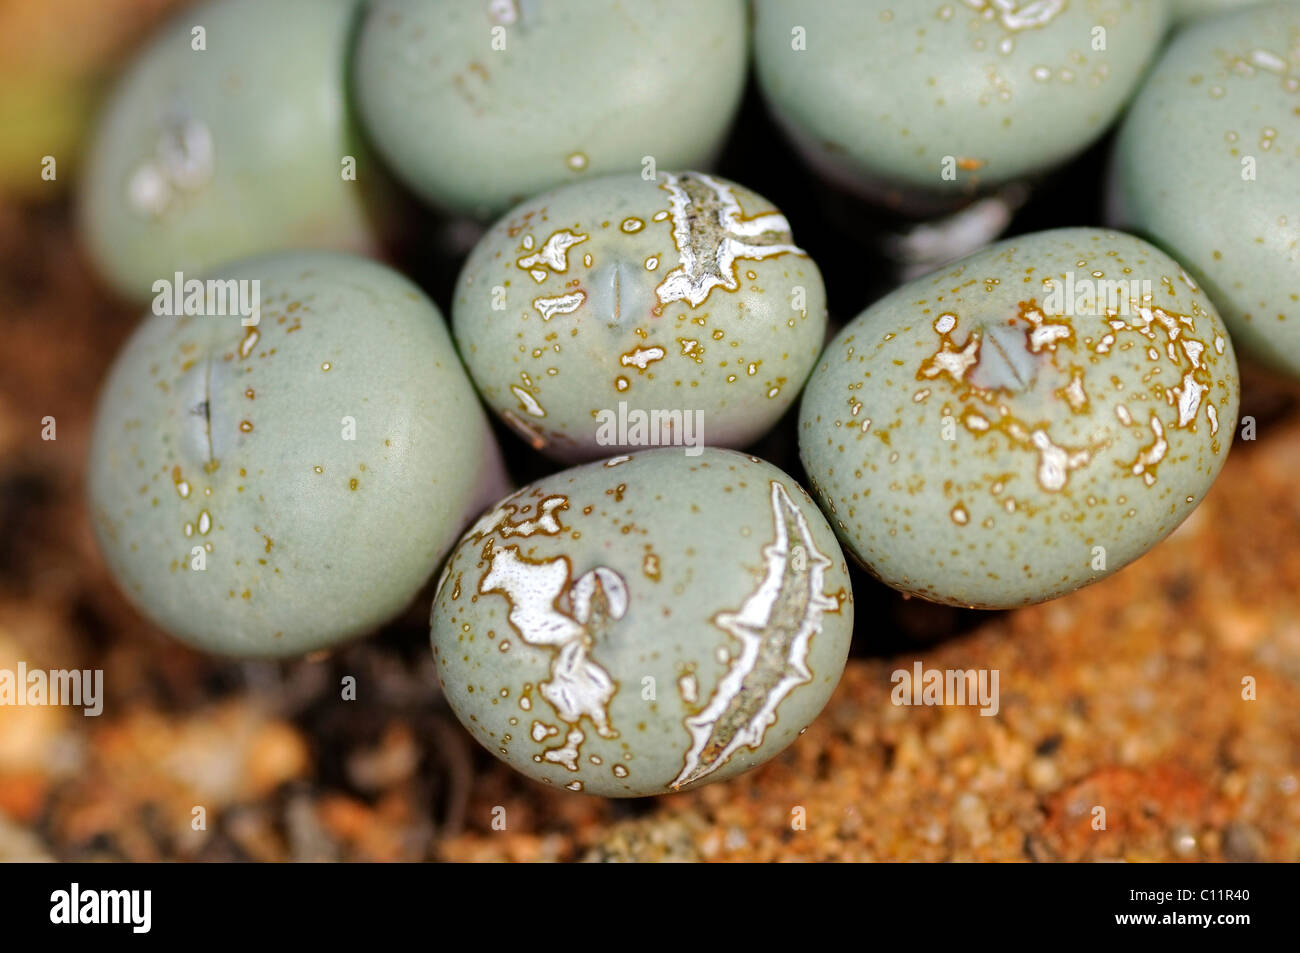 Knopies (Conophytum flavum), Namaqualand, South Africa, Africa Stock Photo